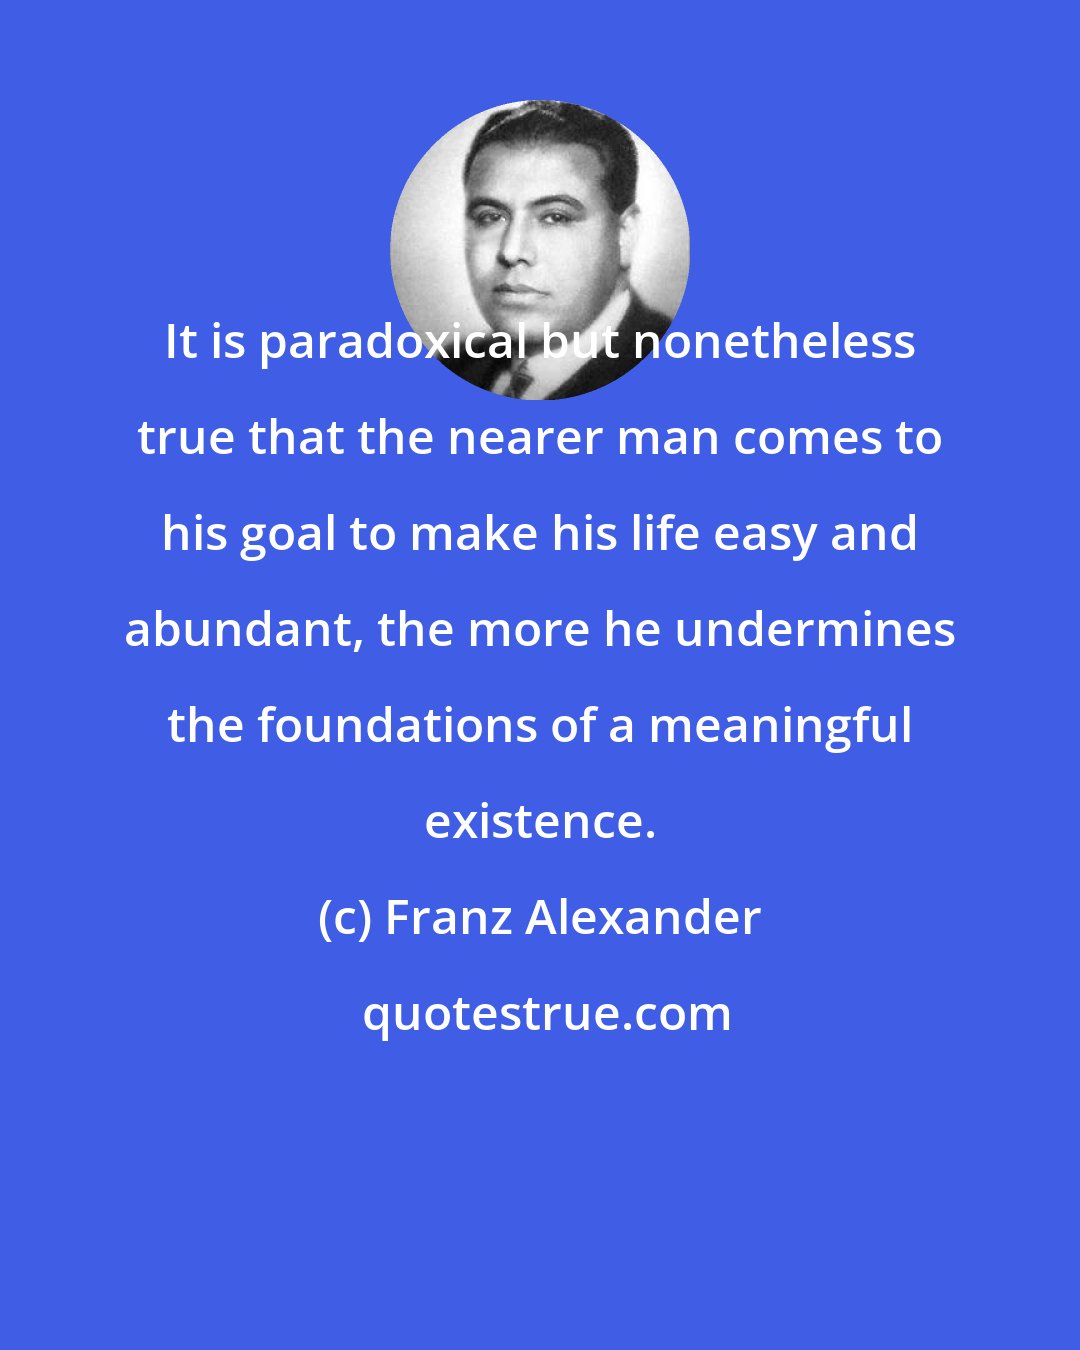 Franz Alexander: It is paradoxical but nonetheless true that the nearer man comes to his goal to make his life easy and abundant, the more he undermines the foundations of a meaningful existence.